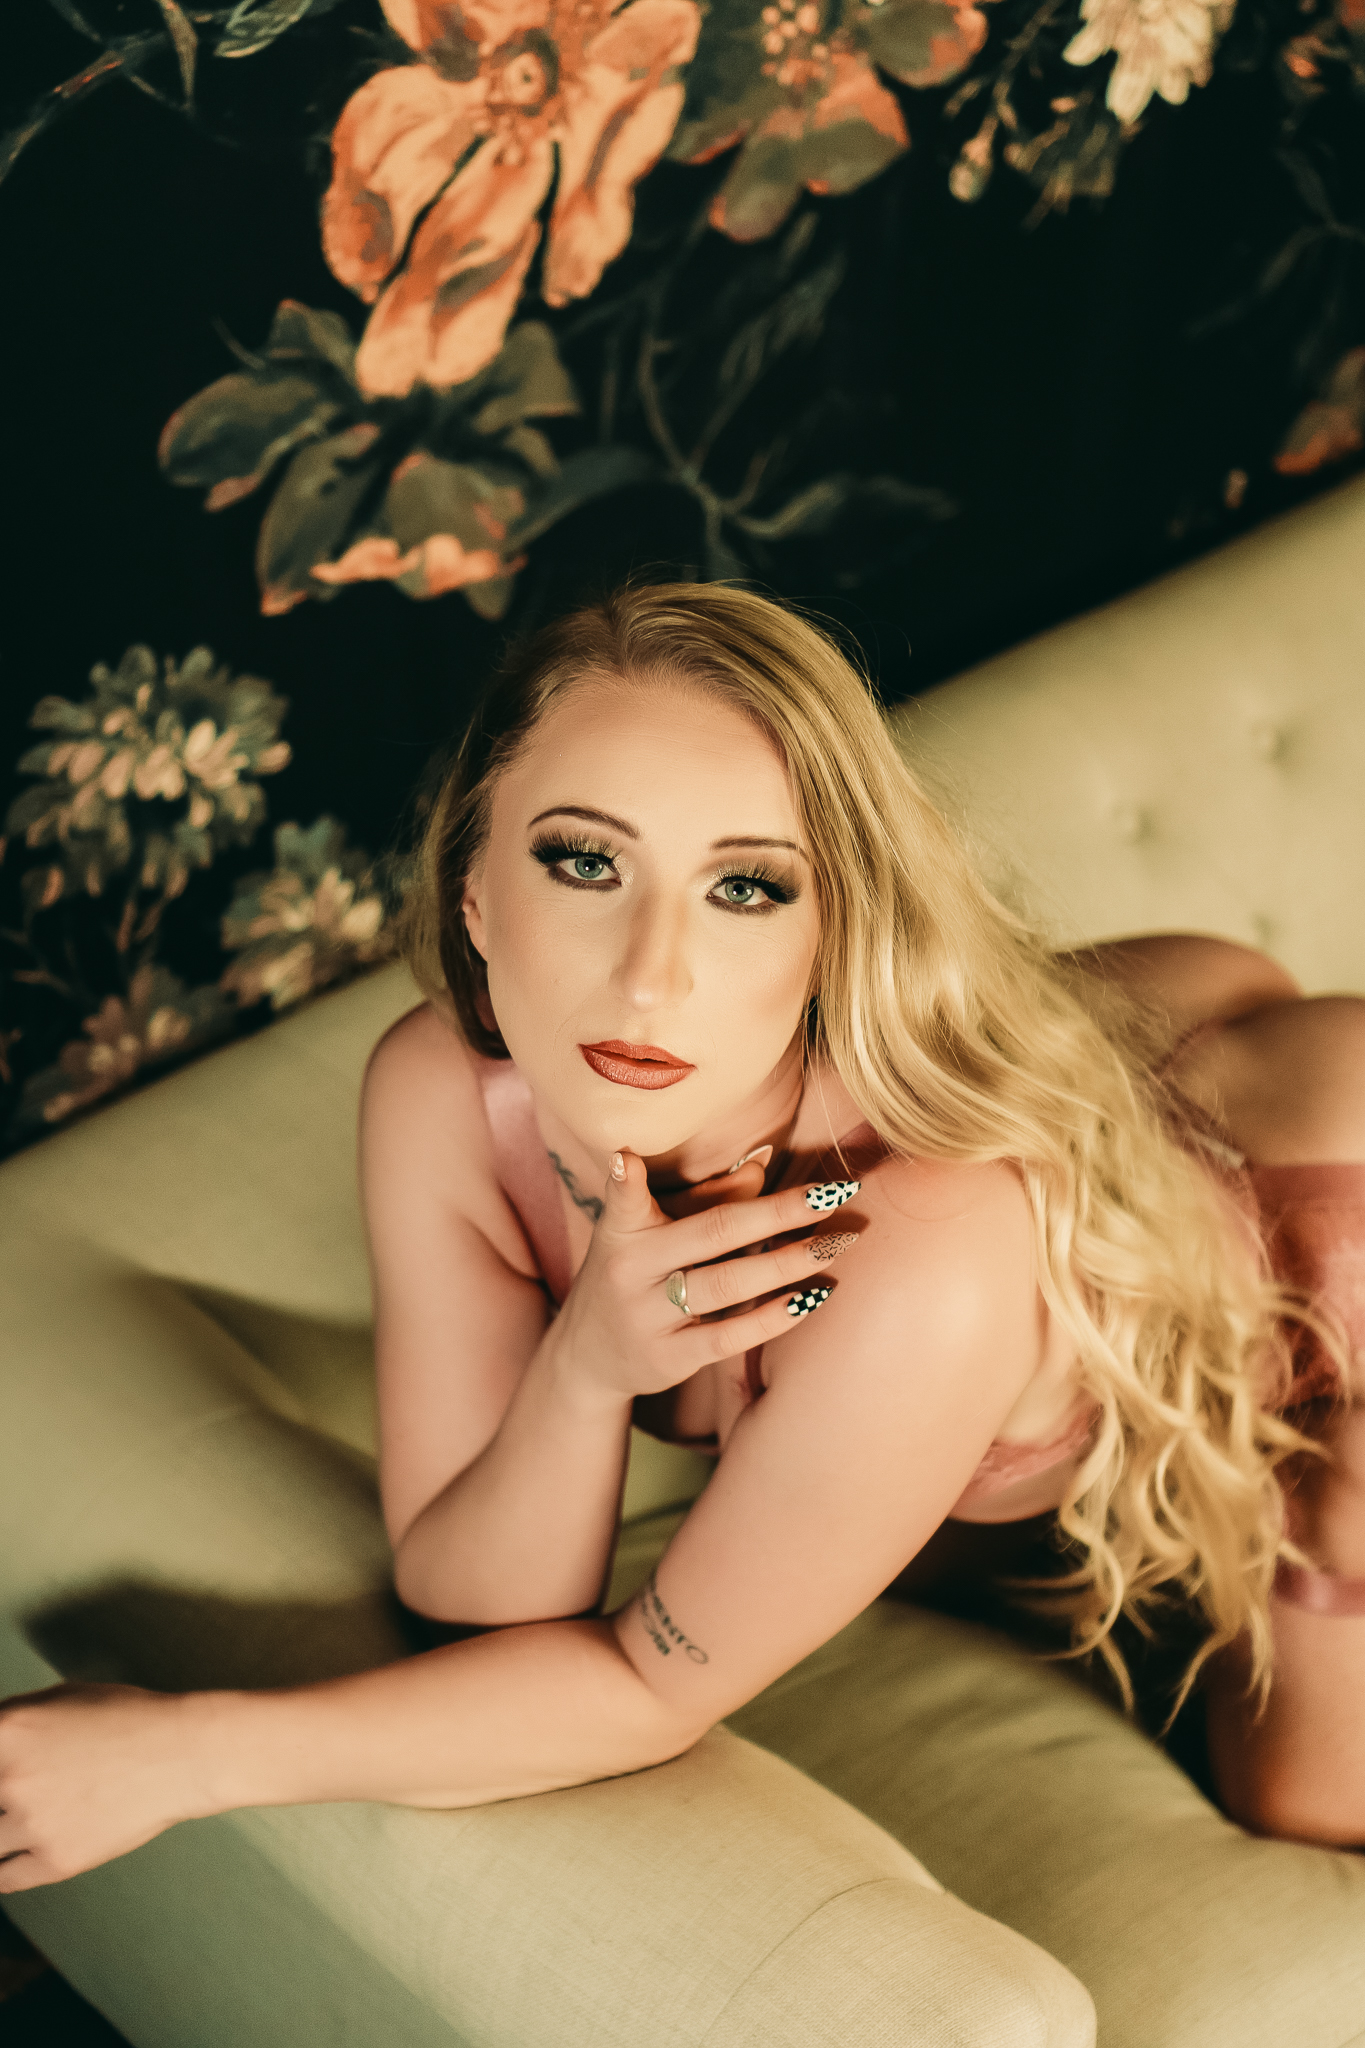 blonde woman sitting on the couch in lingerie for a st louis boudoir experience